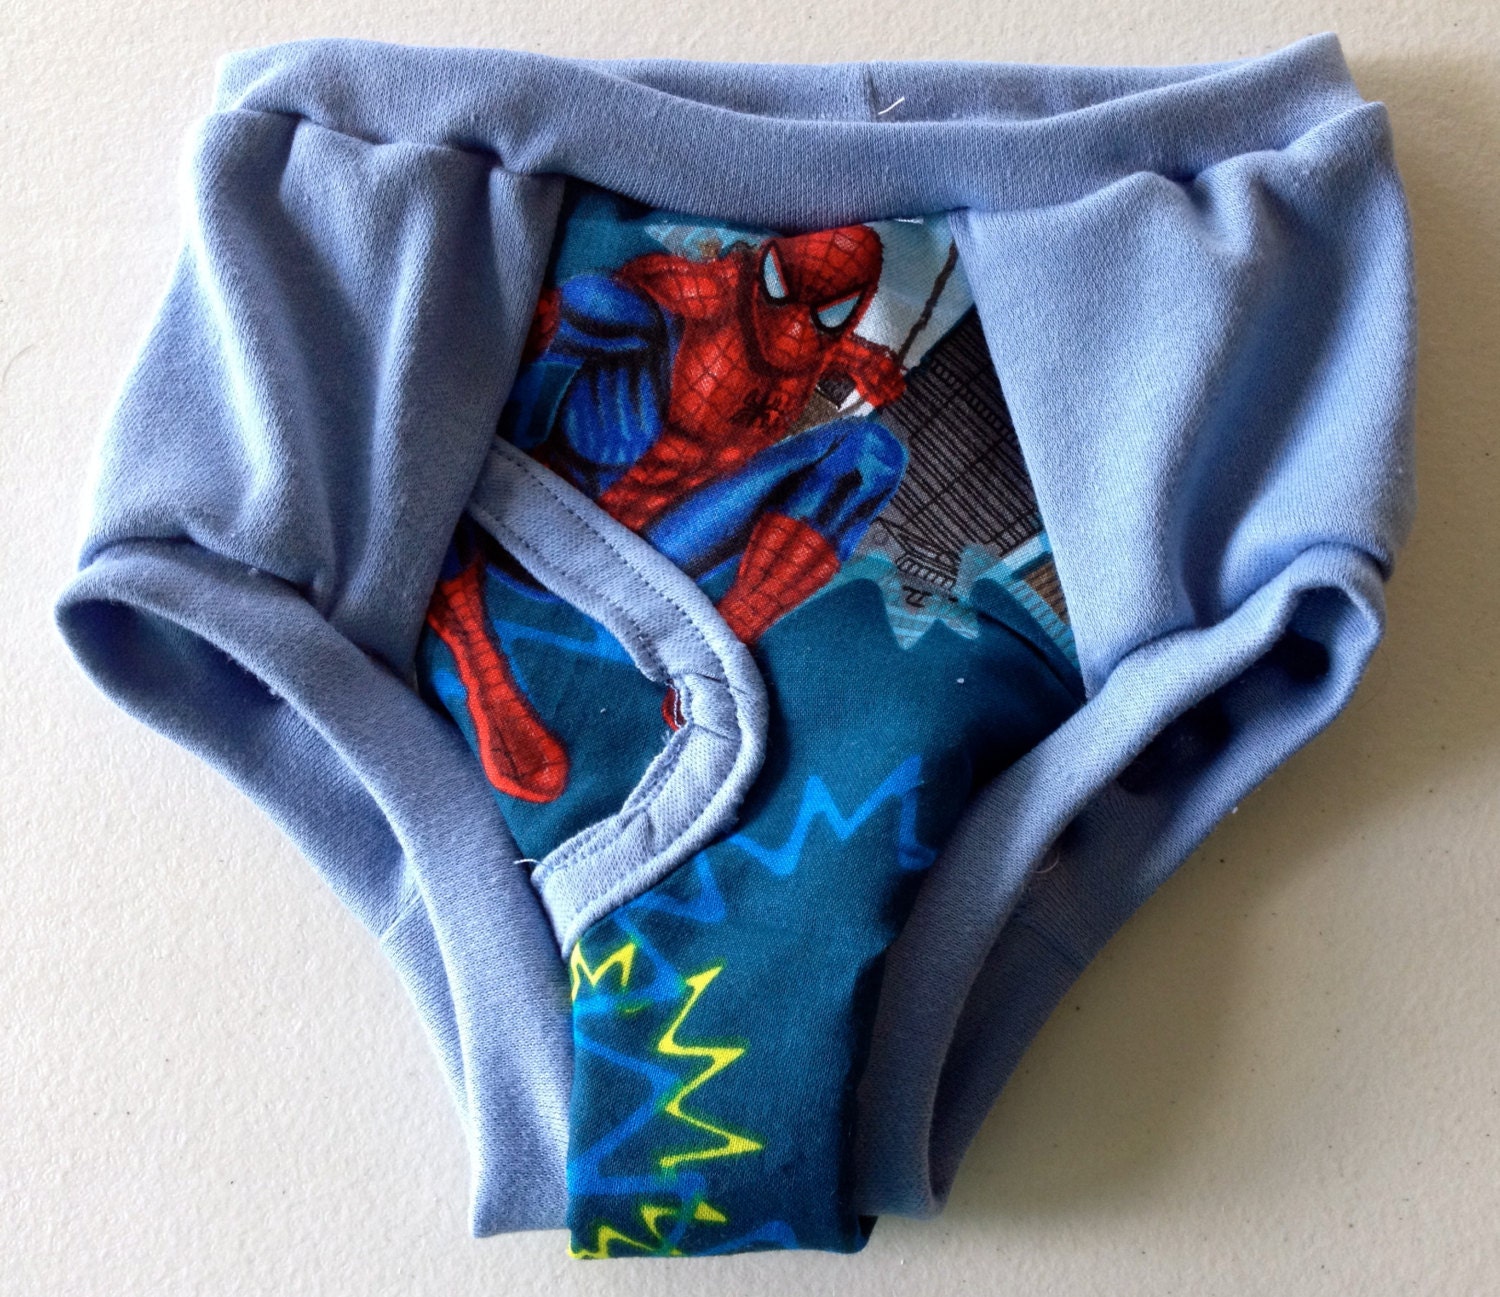 Spiderman Training Underwear by myfunclothes on Etsy